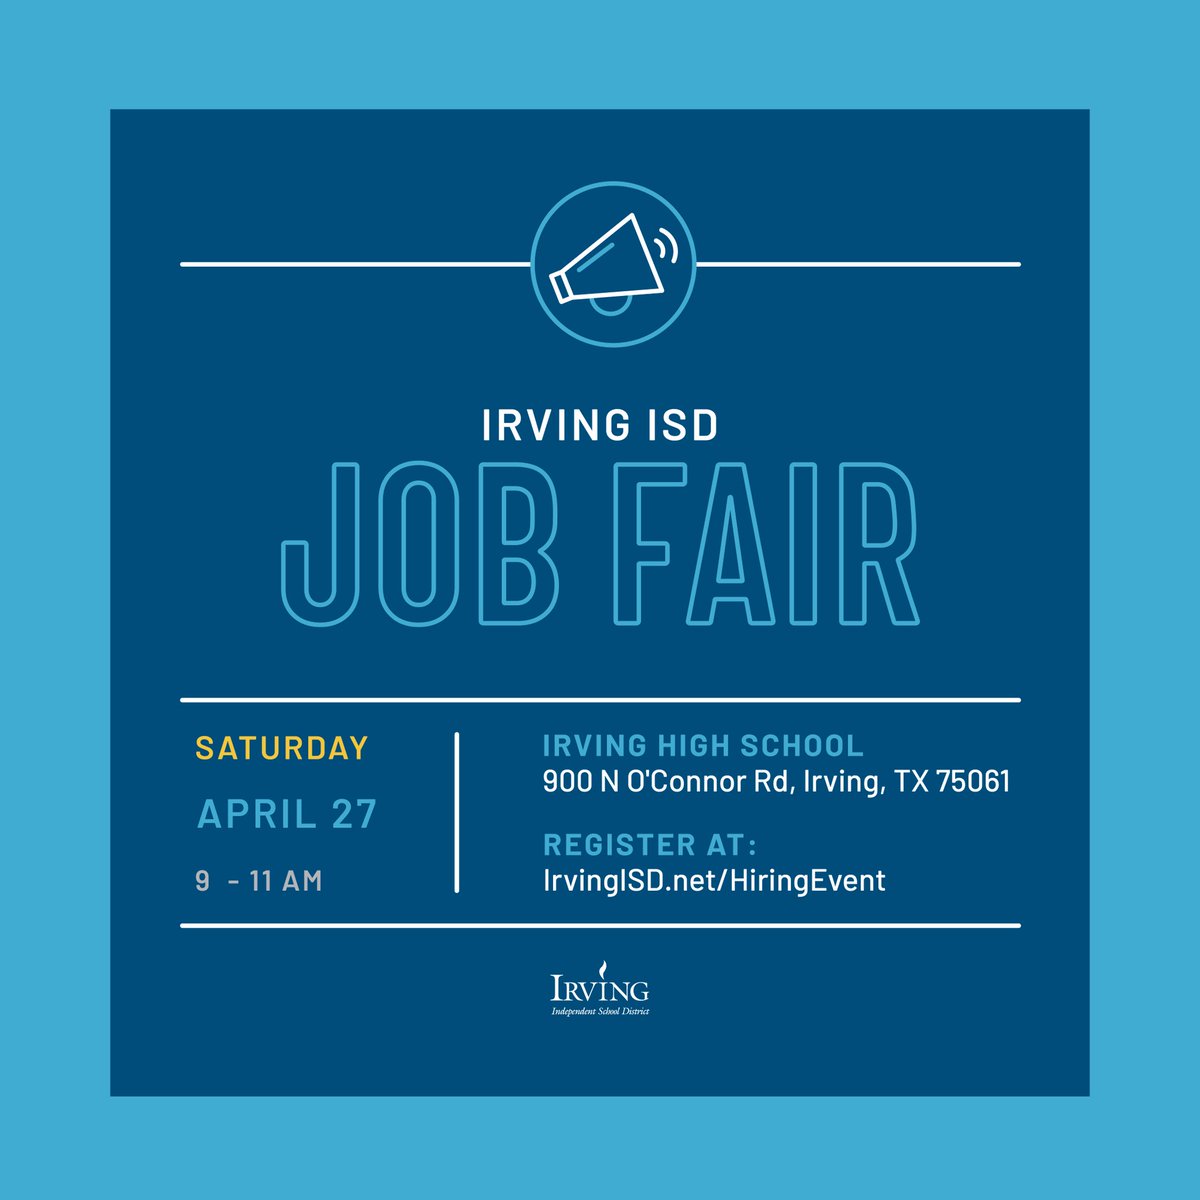 📢 Calling all educators, drivers, and facilities pros! Irving ISD will be hosting a job fair this Saturday. 🗓️ April 27, 9-11 AM 📍 Irving High School 👔 On-site Interview Opportunities Register today at IrvingISD.net/HiringEvent Your next career move starts here!🍎🚌